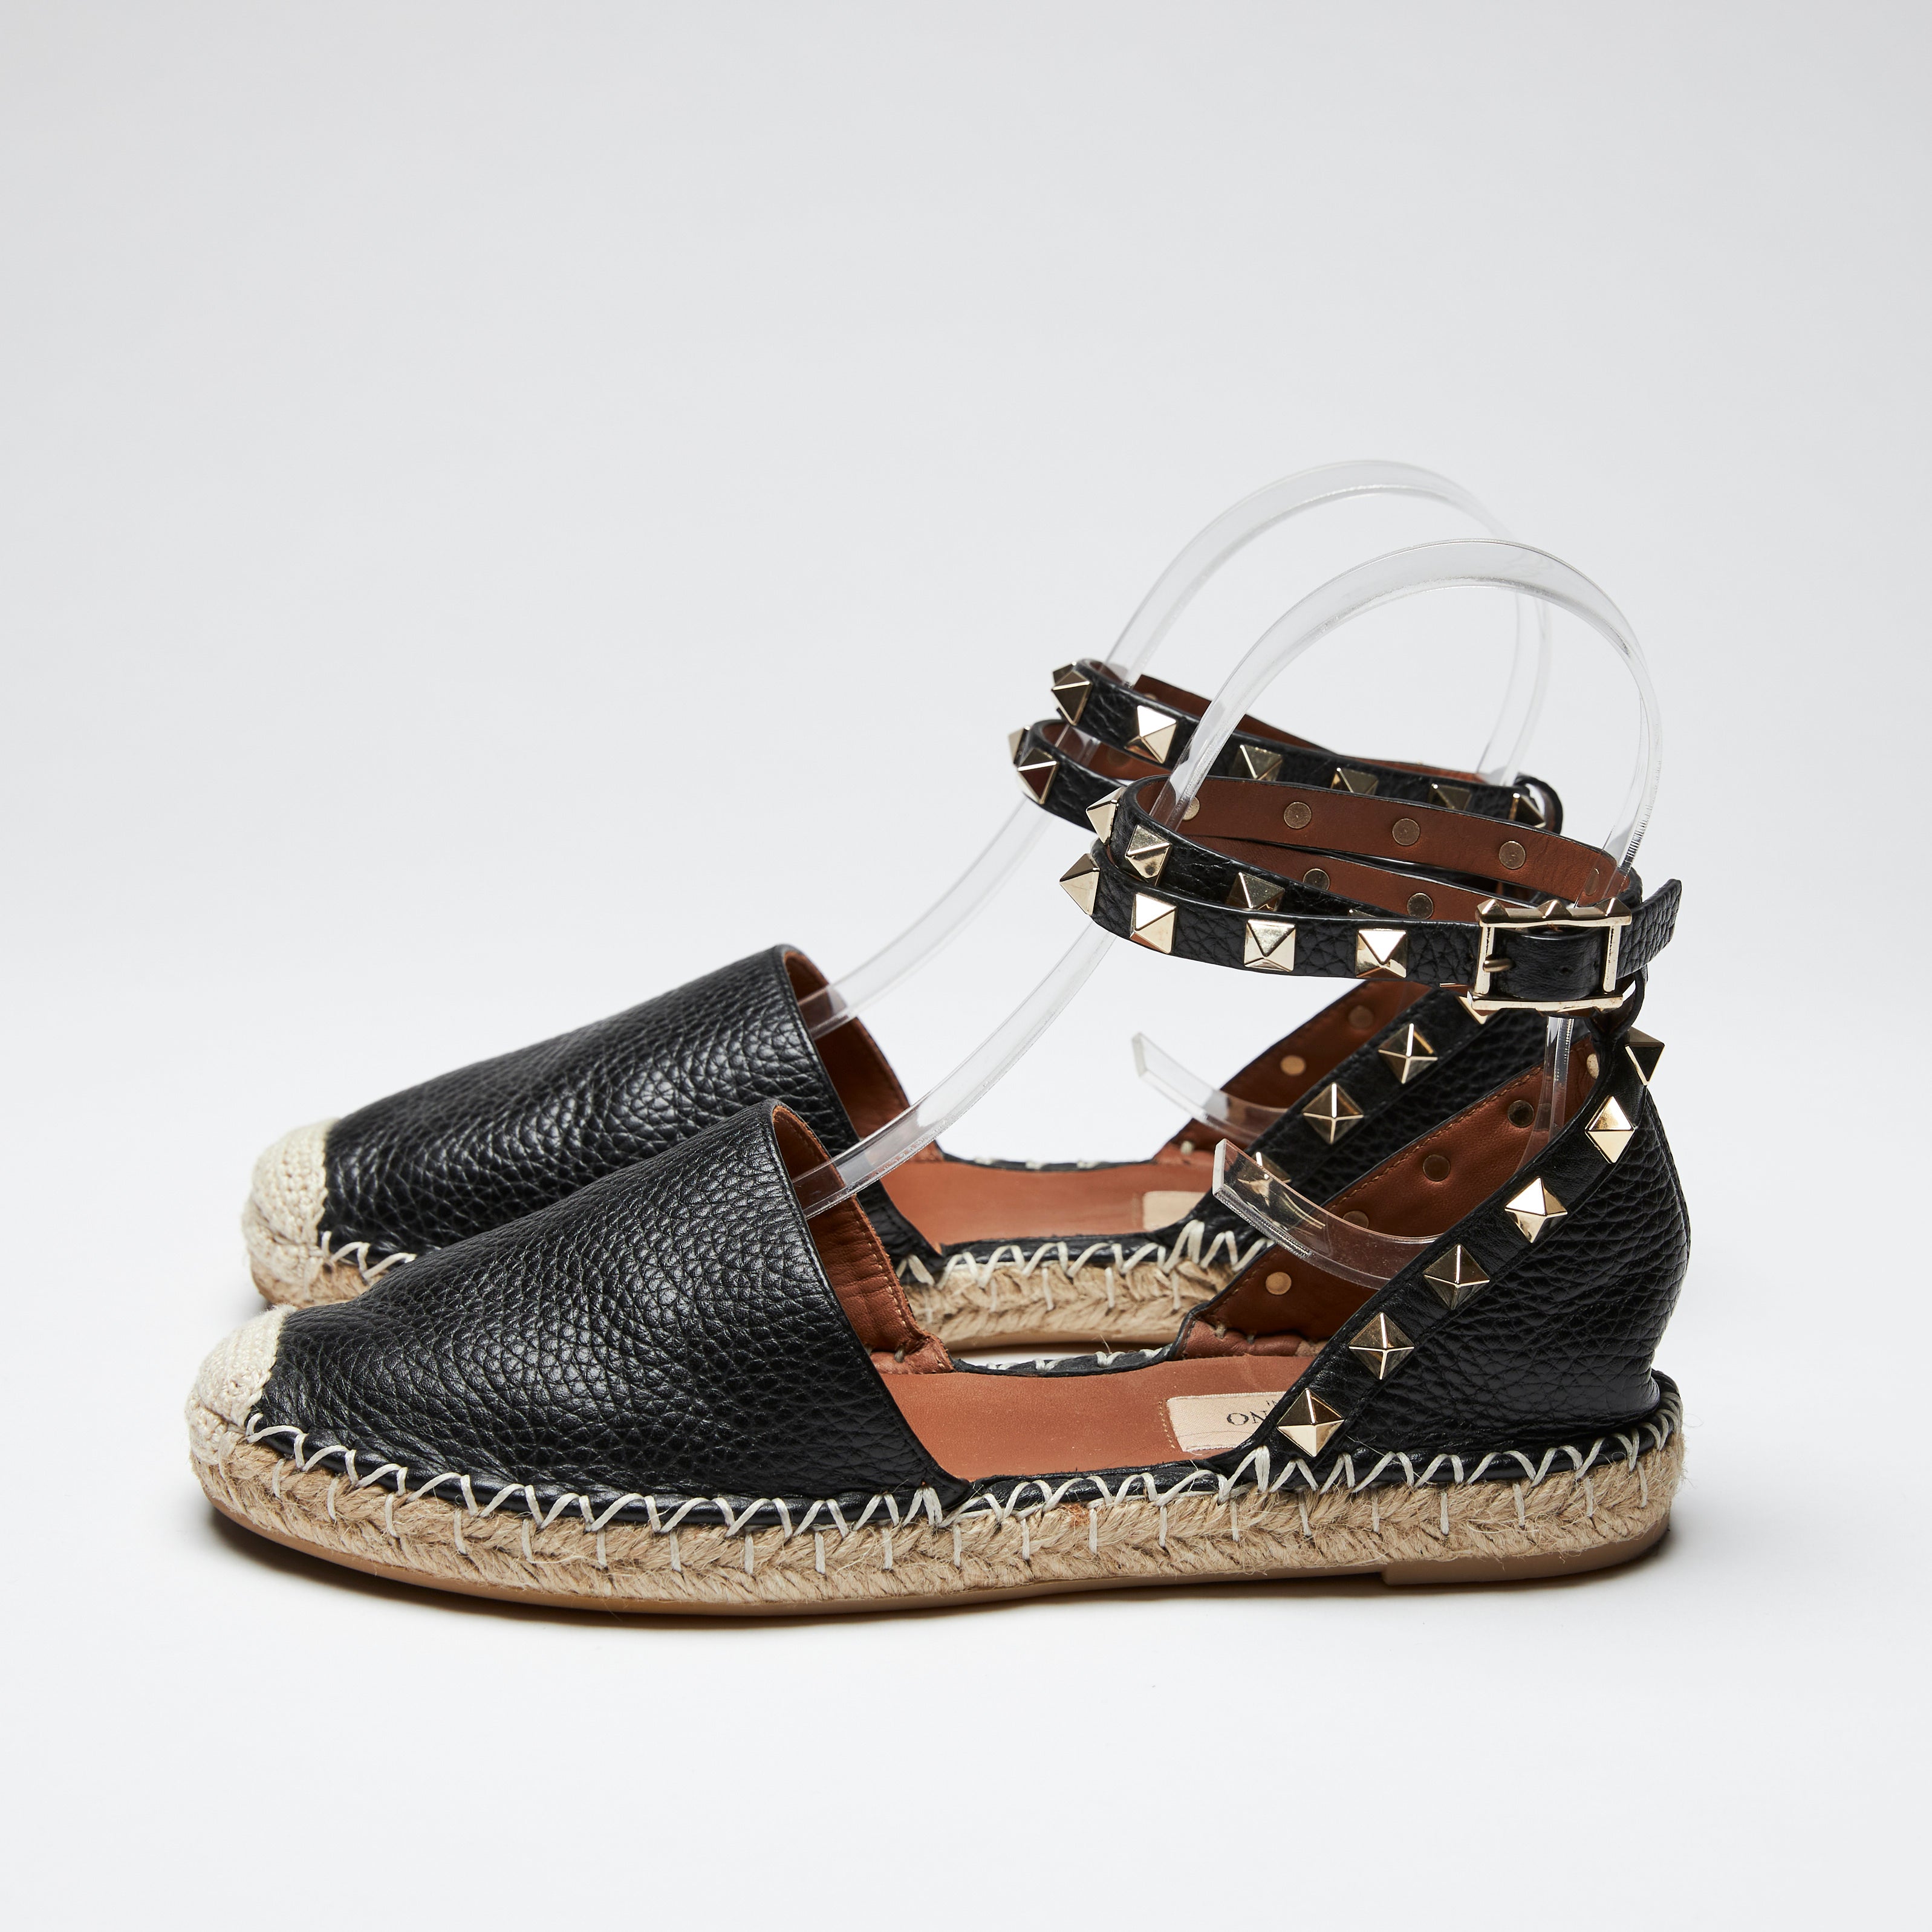 Valentino Rockstud Black Leather Espadrilles with Ankle Strap | Finds Consignment